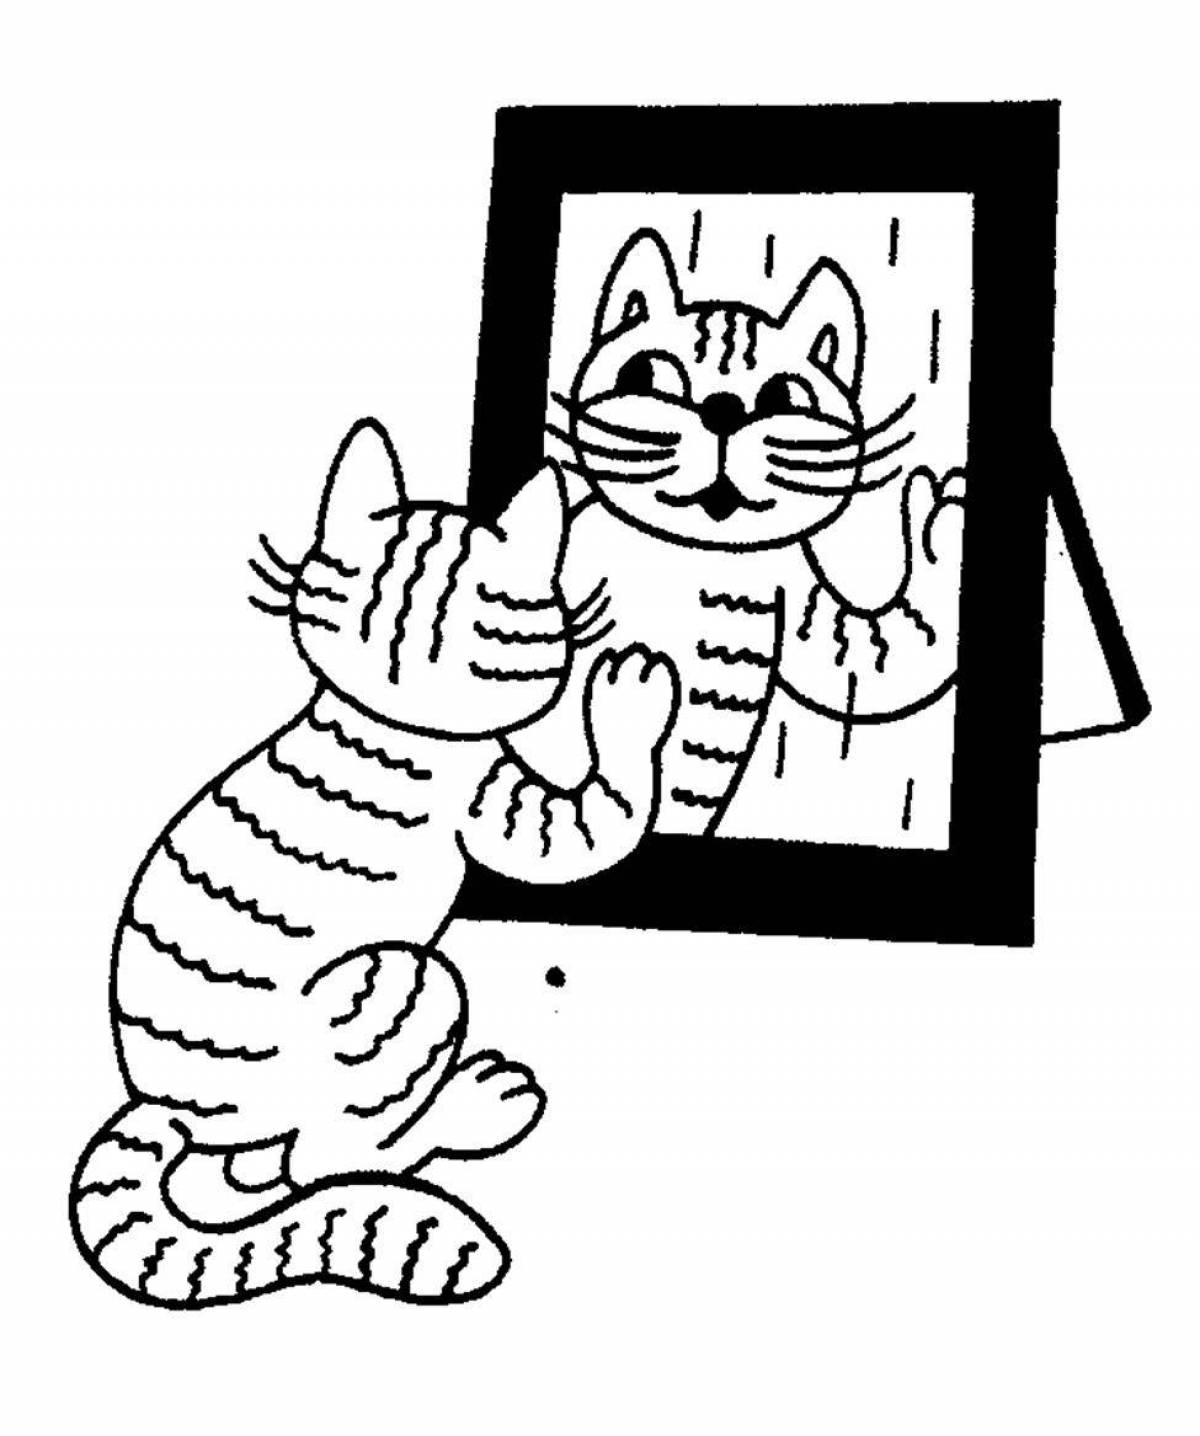 Adorable tabby kitten coloring page